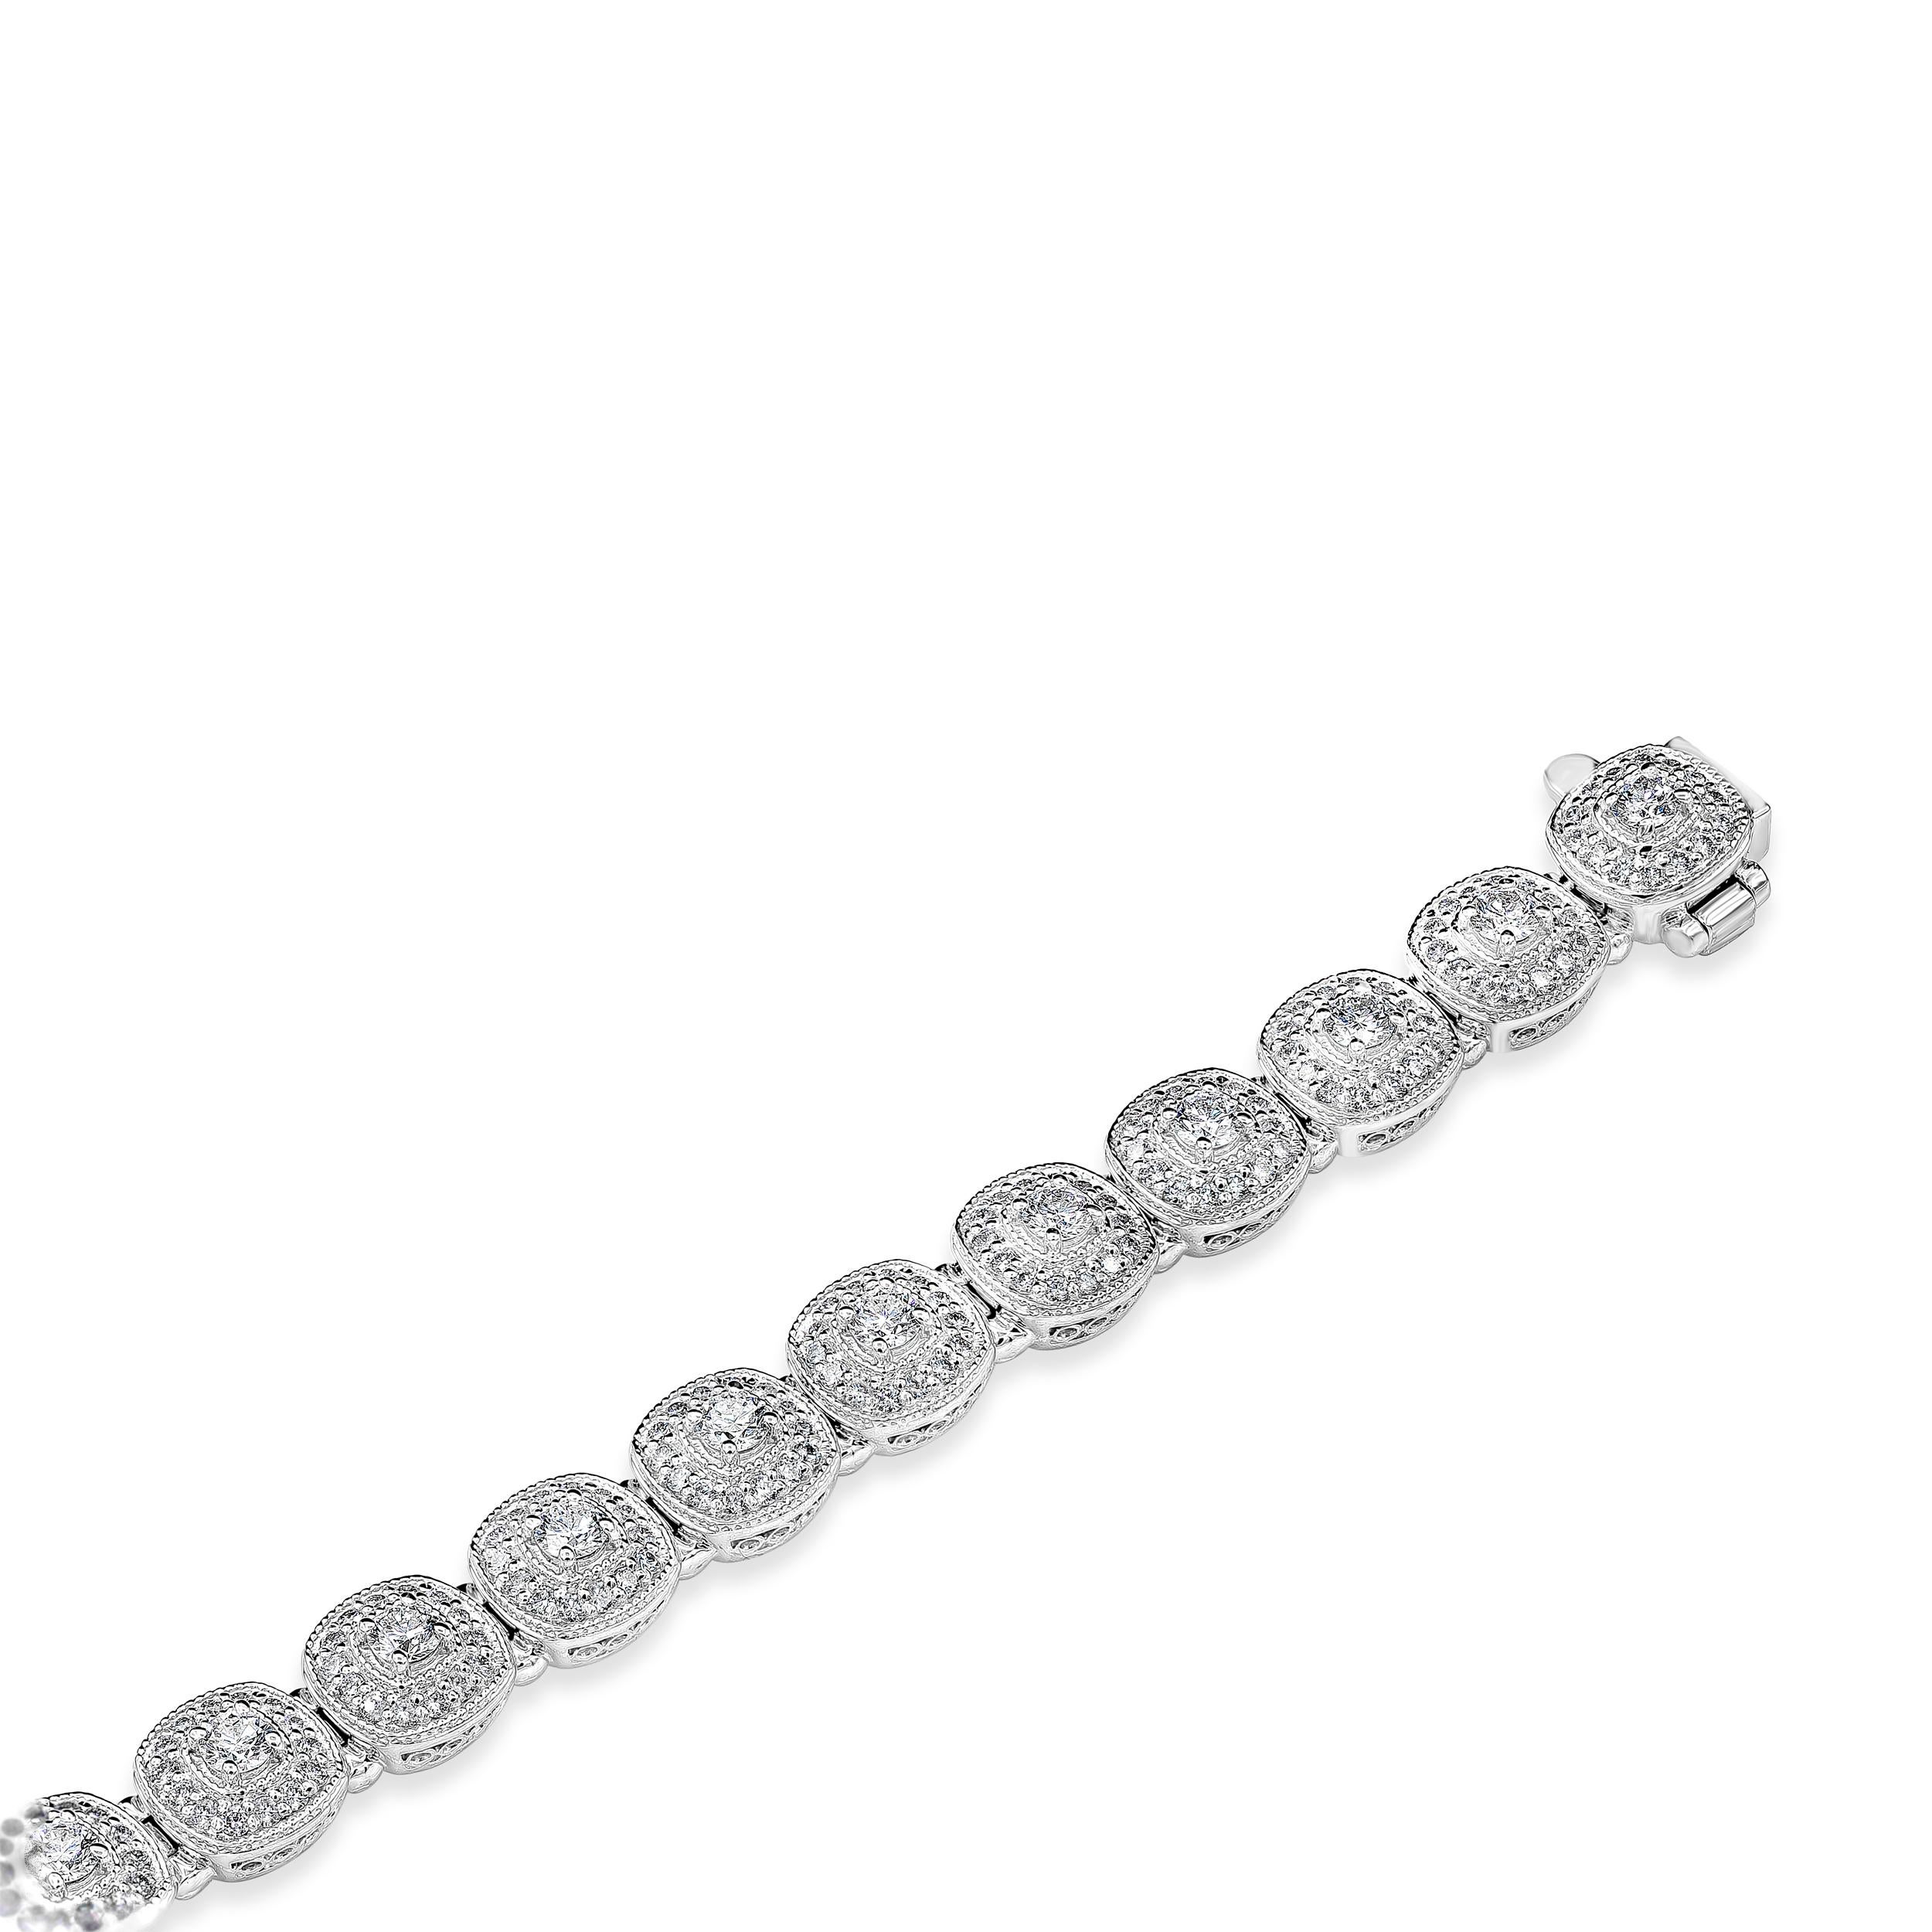 An illusion tennis bracelet showcasing a cushion cut diamond weighing 1.55 carats total, surrounded with round brilliant diamonds weighing 1.51 carats total, F in Color and VS-SI in Clarity. Cluster illusion in a cushion style setting tennis